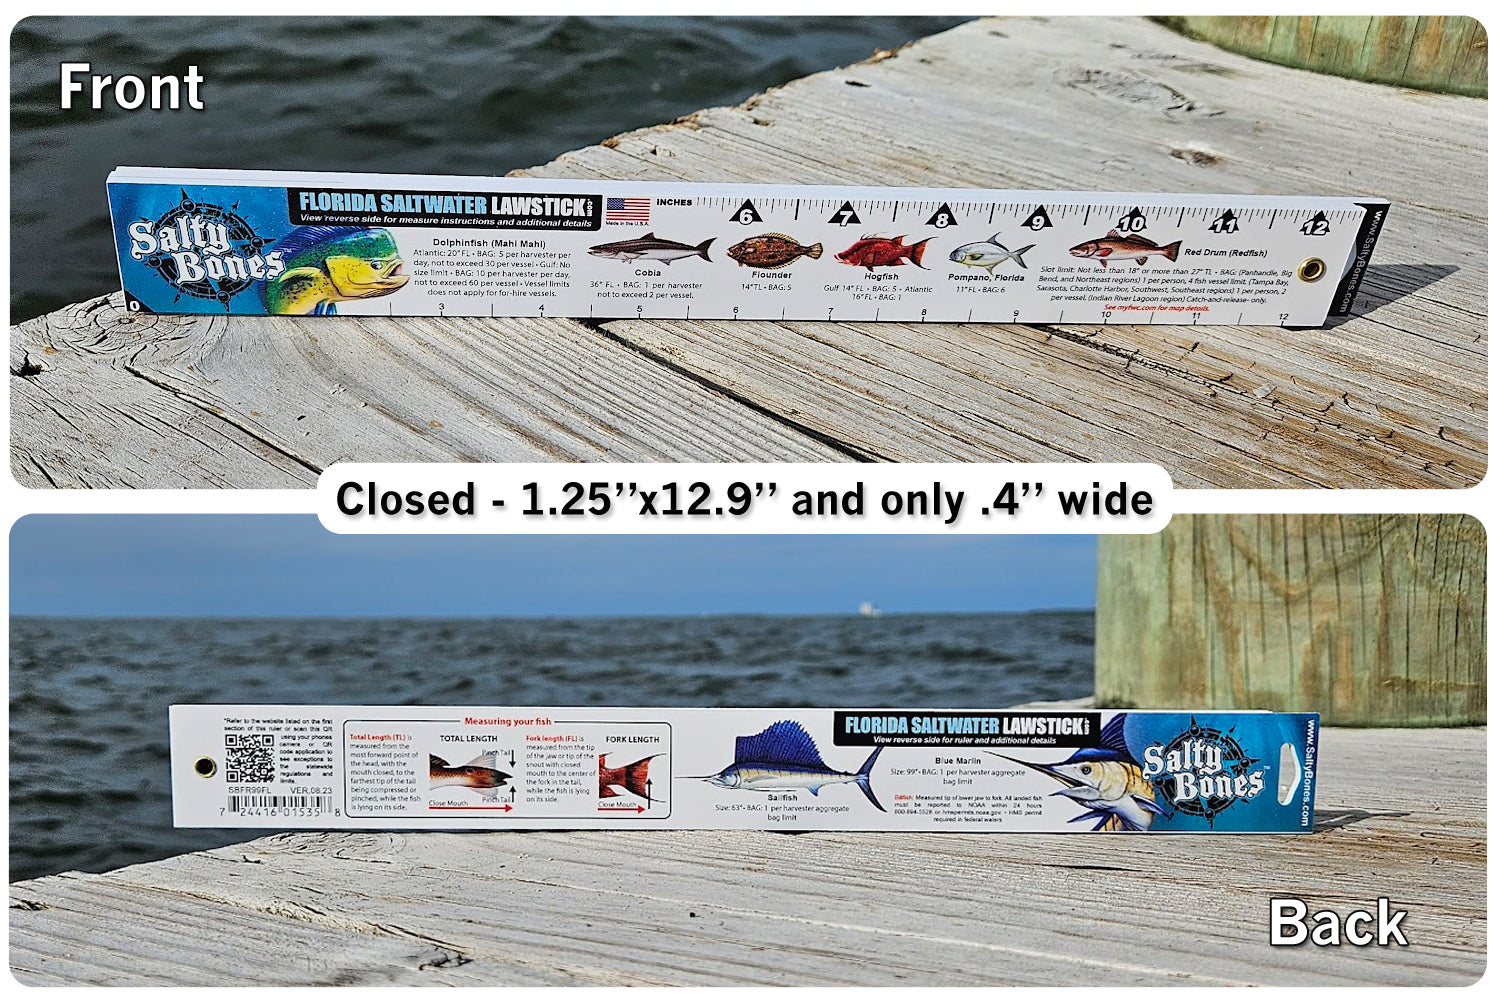 Salty Bones Florida Saltwater Lawstick - Double-Sided 36 Folding Fishing  Ruler with Florida's Atlantic and Gulf Guidelines